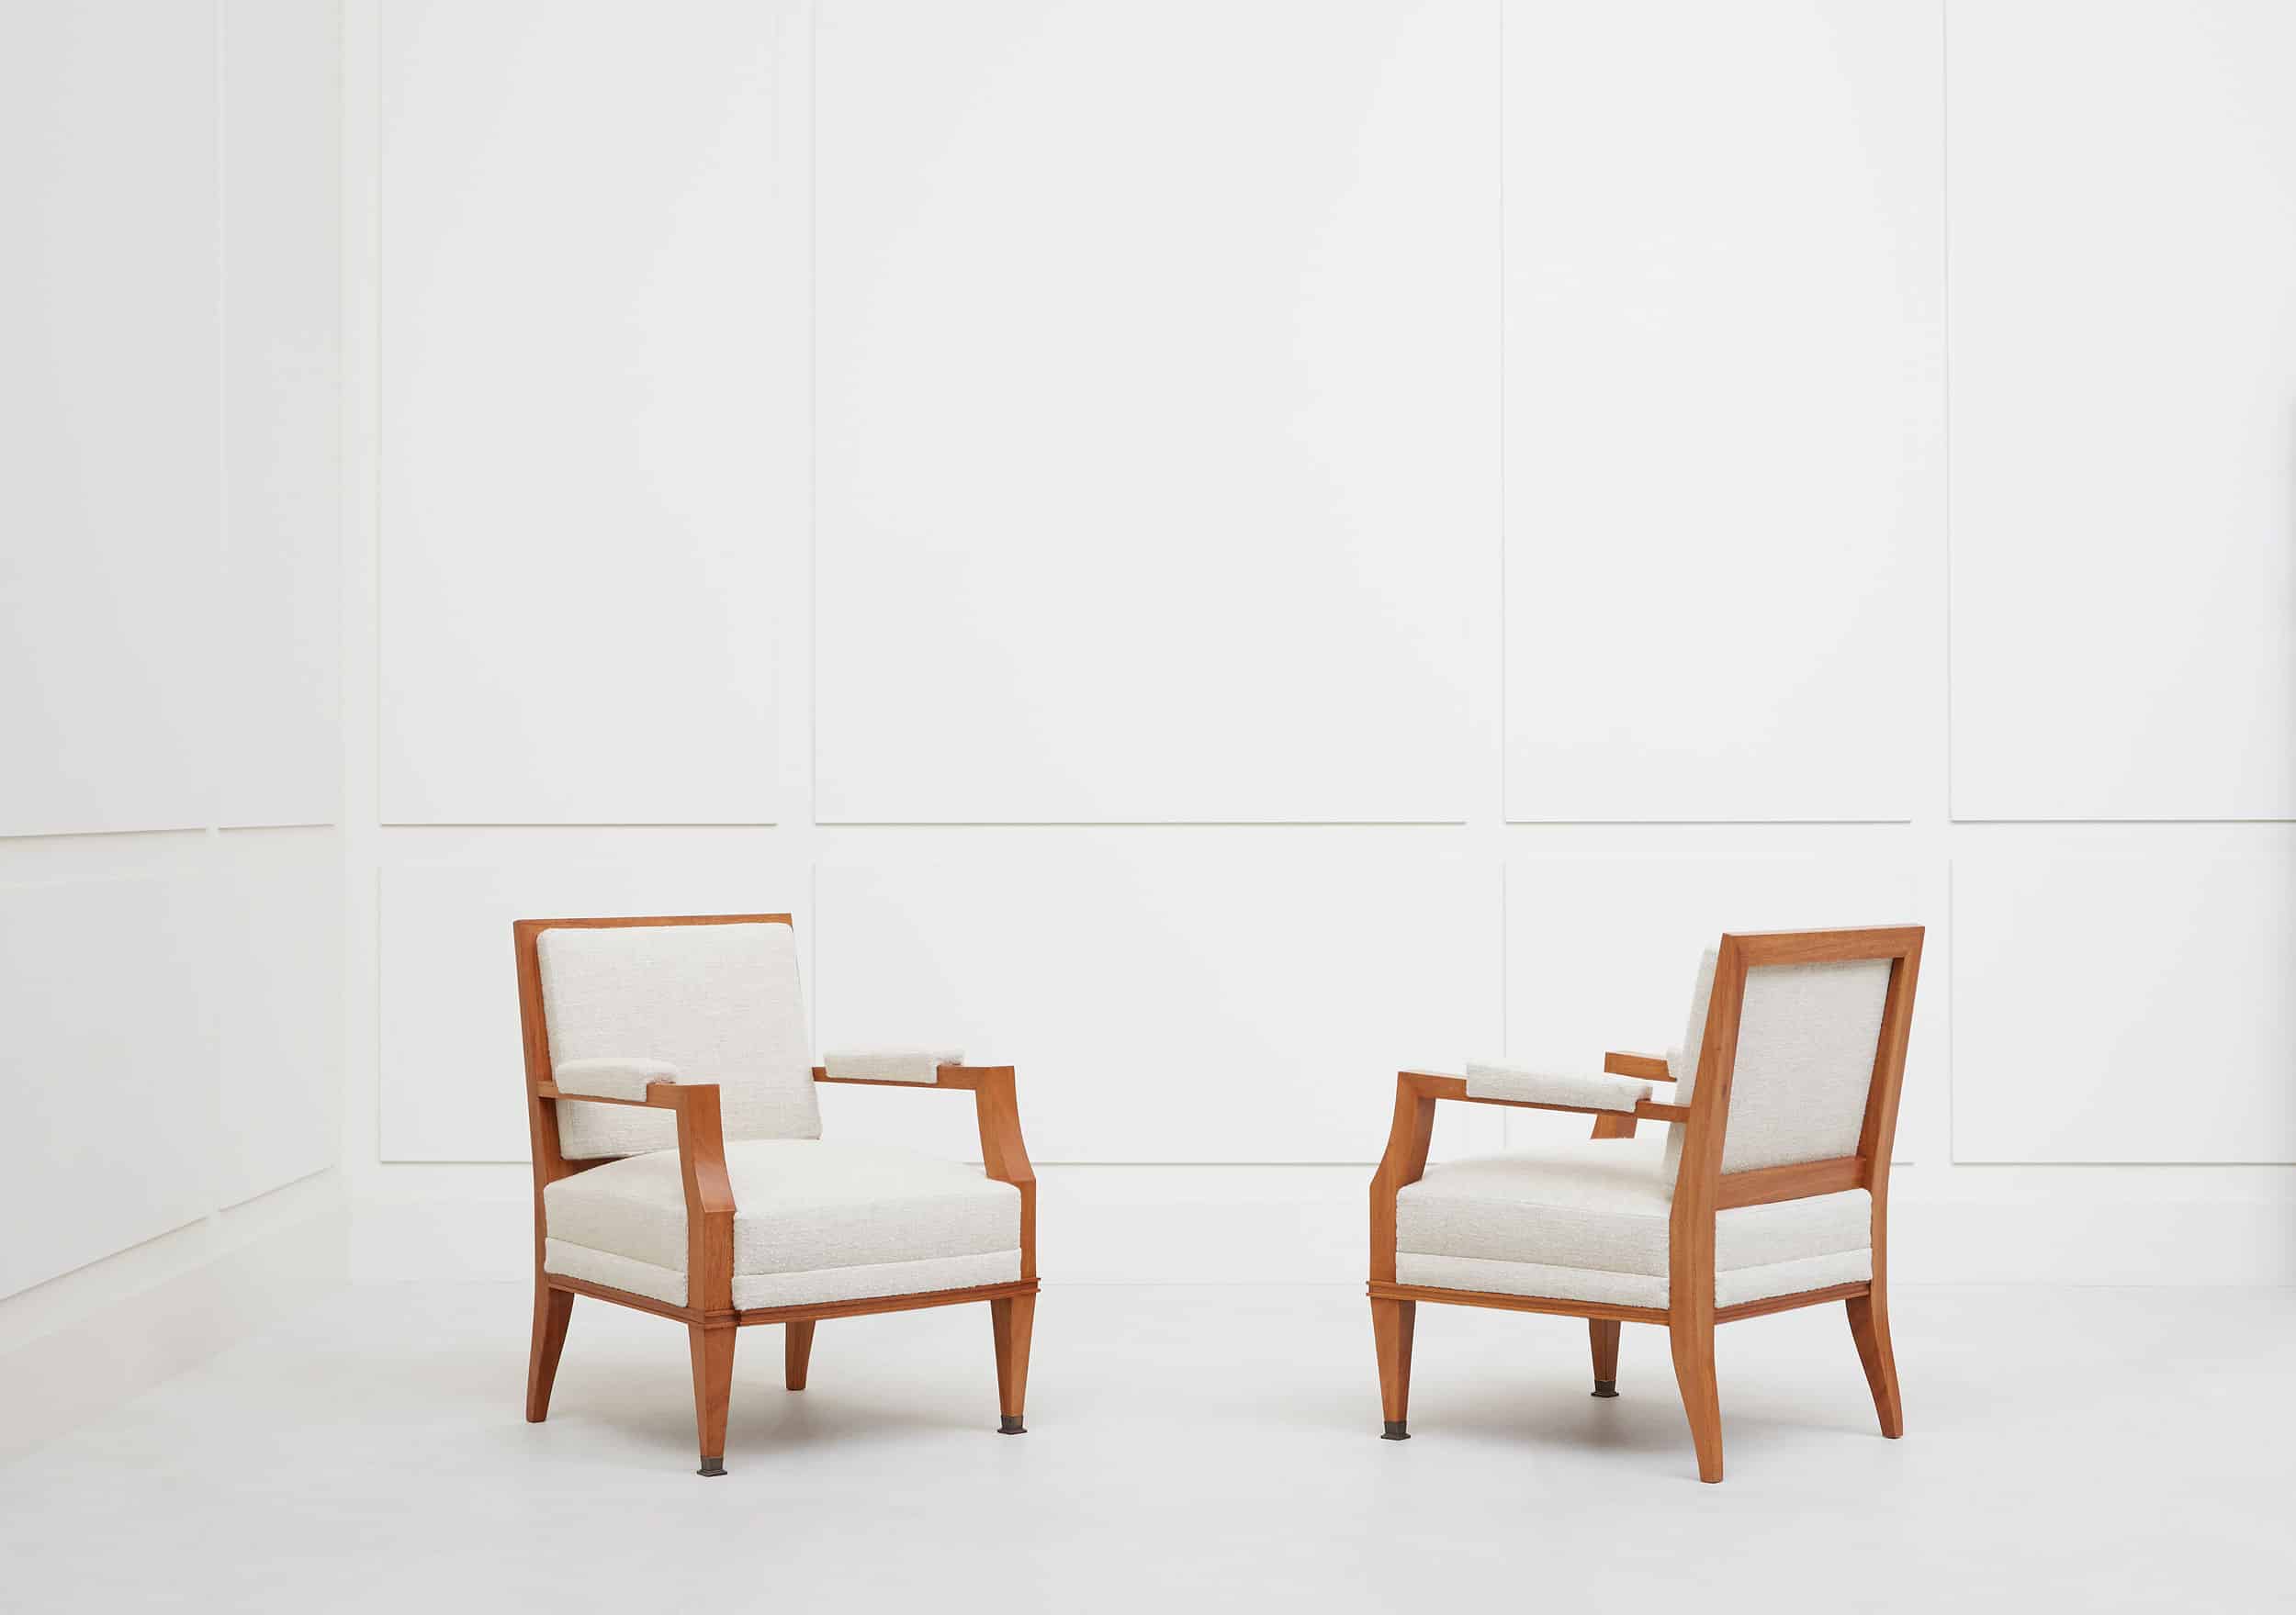 Jacques Quinet, Pair of armchairs, vue 01